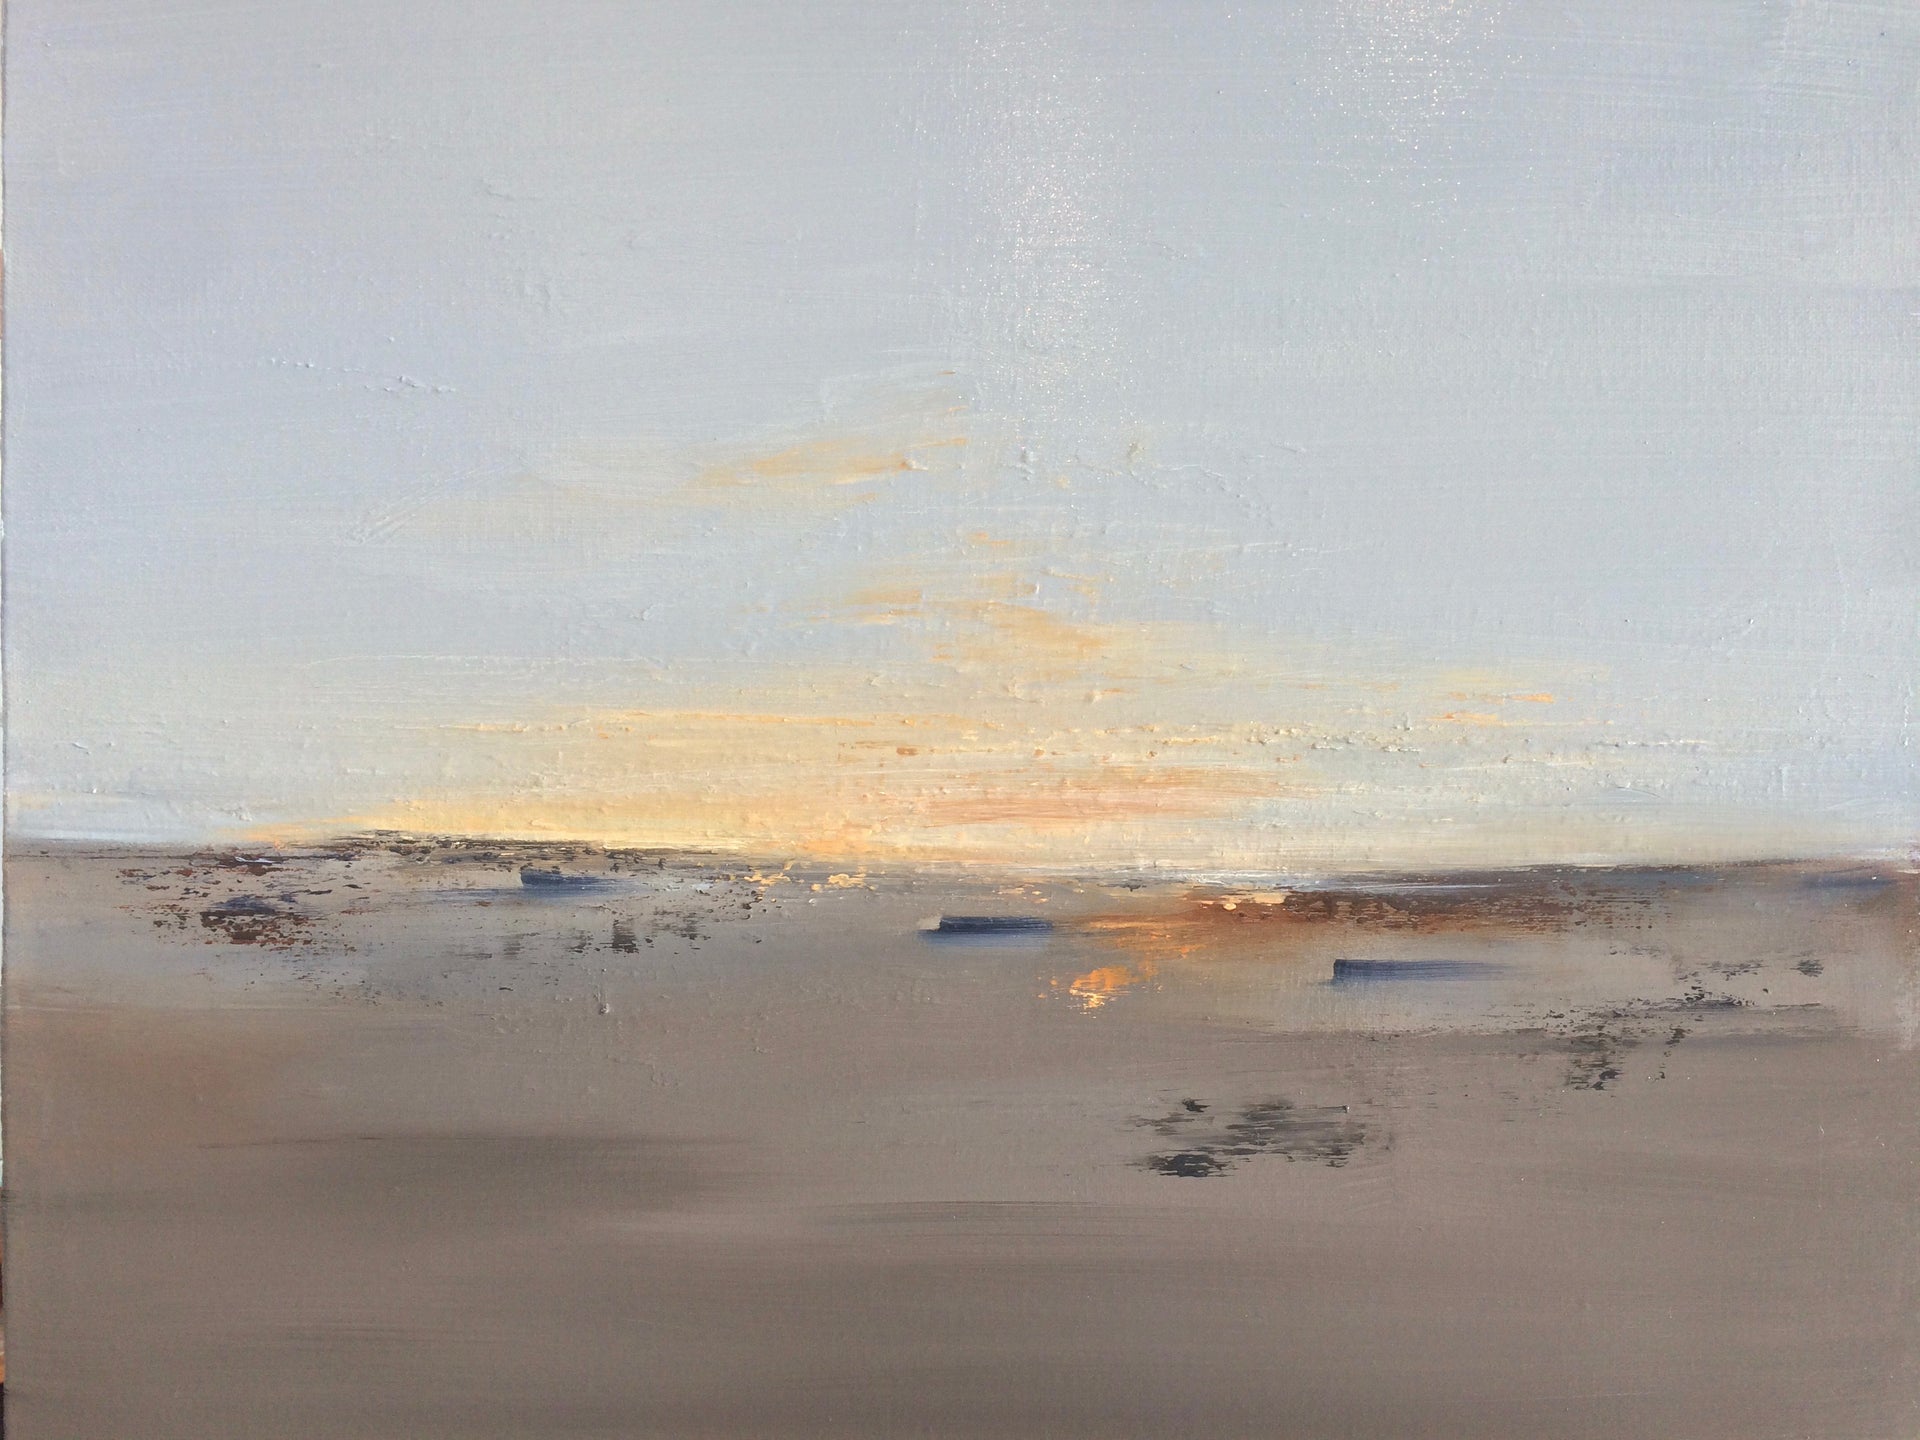 Abstract seascape by Cornwall artist Nicola Mosley in shades of oranges, greys and browns 